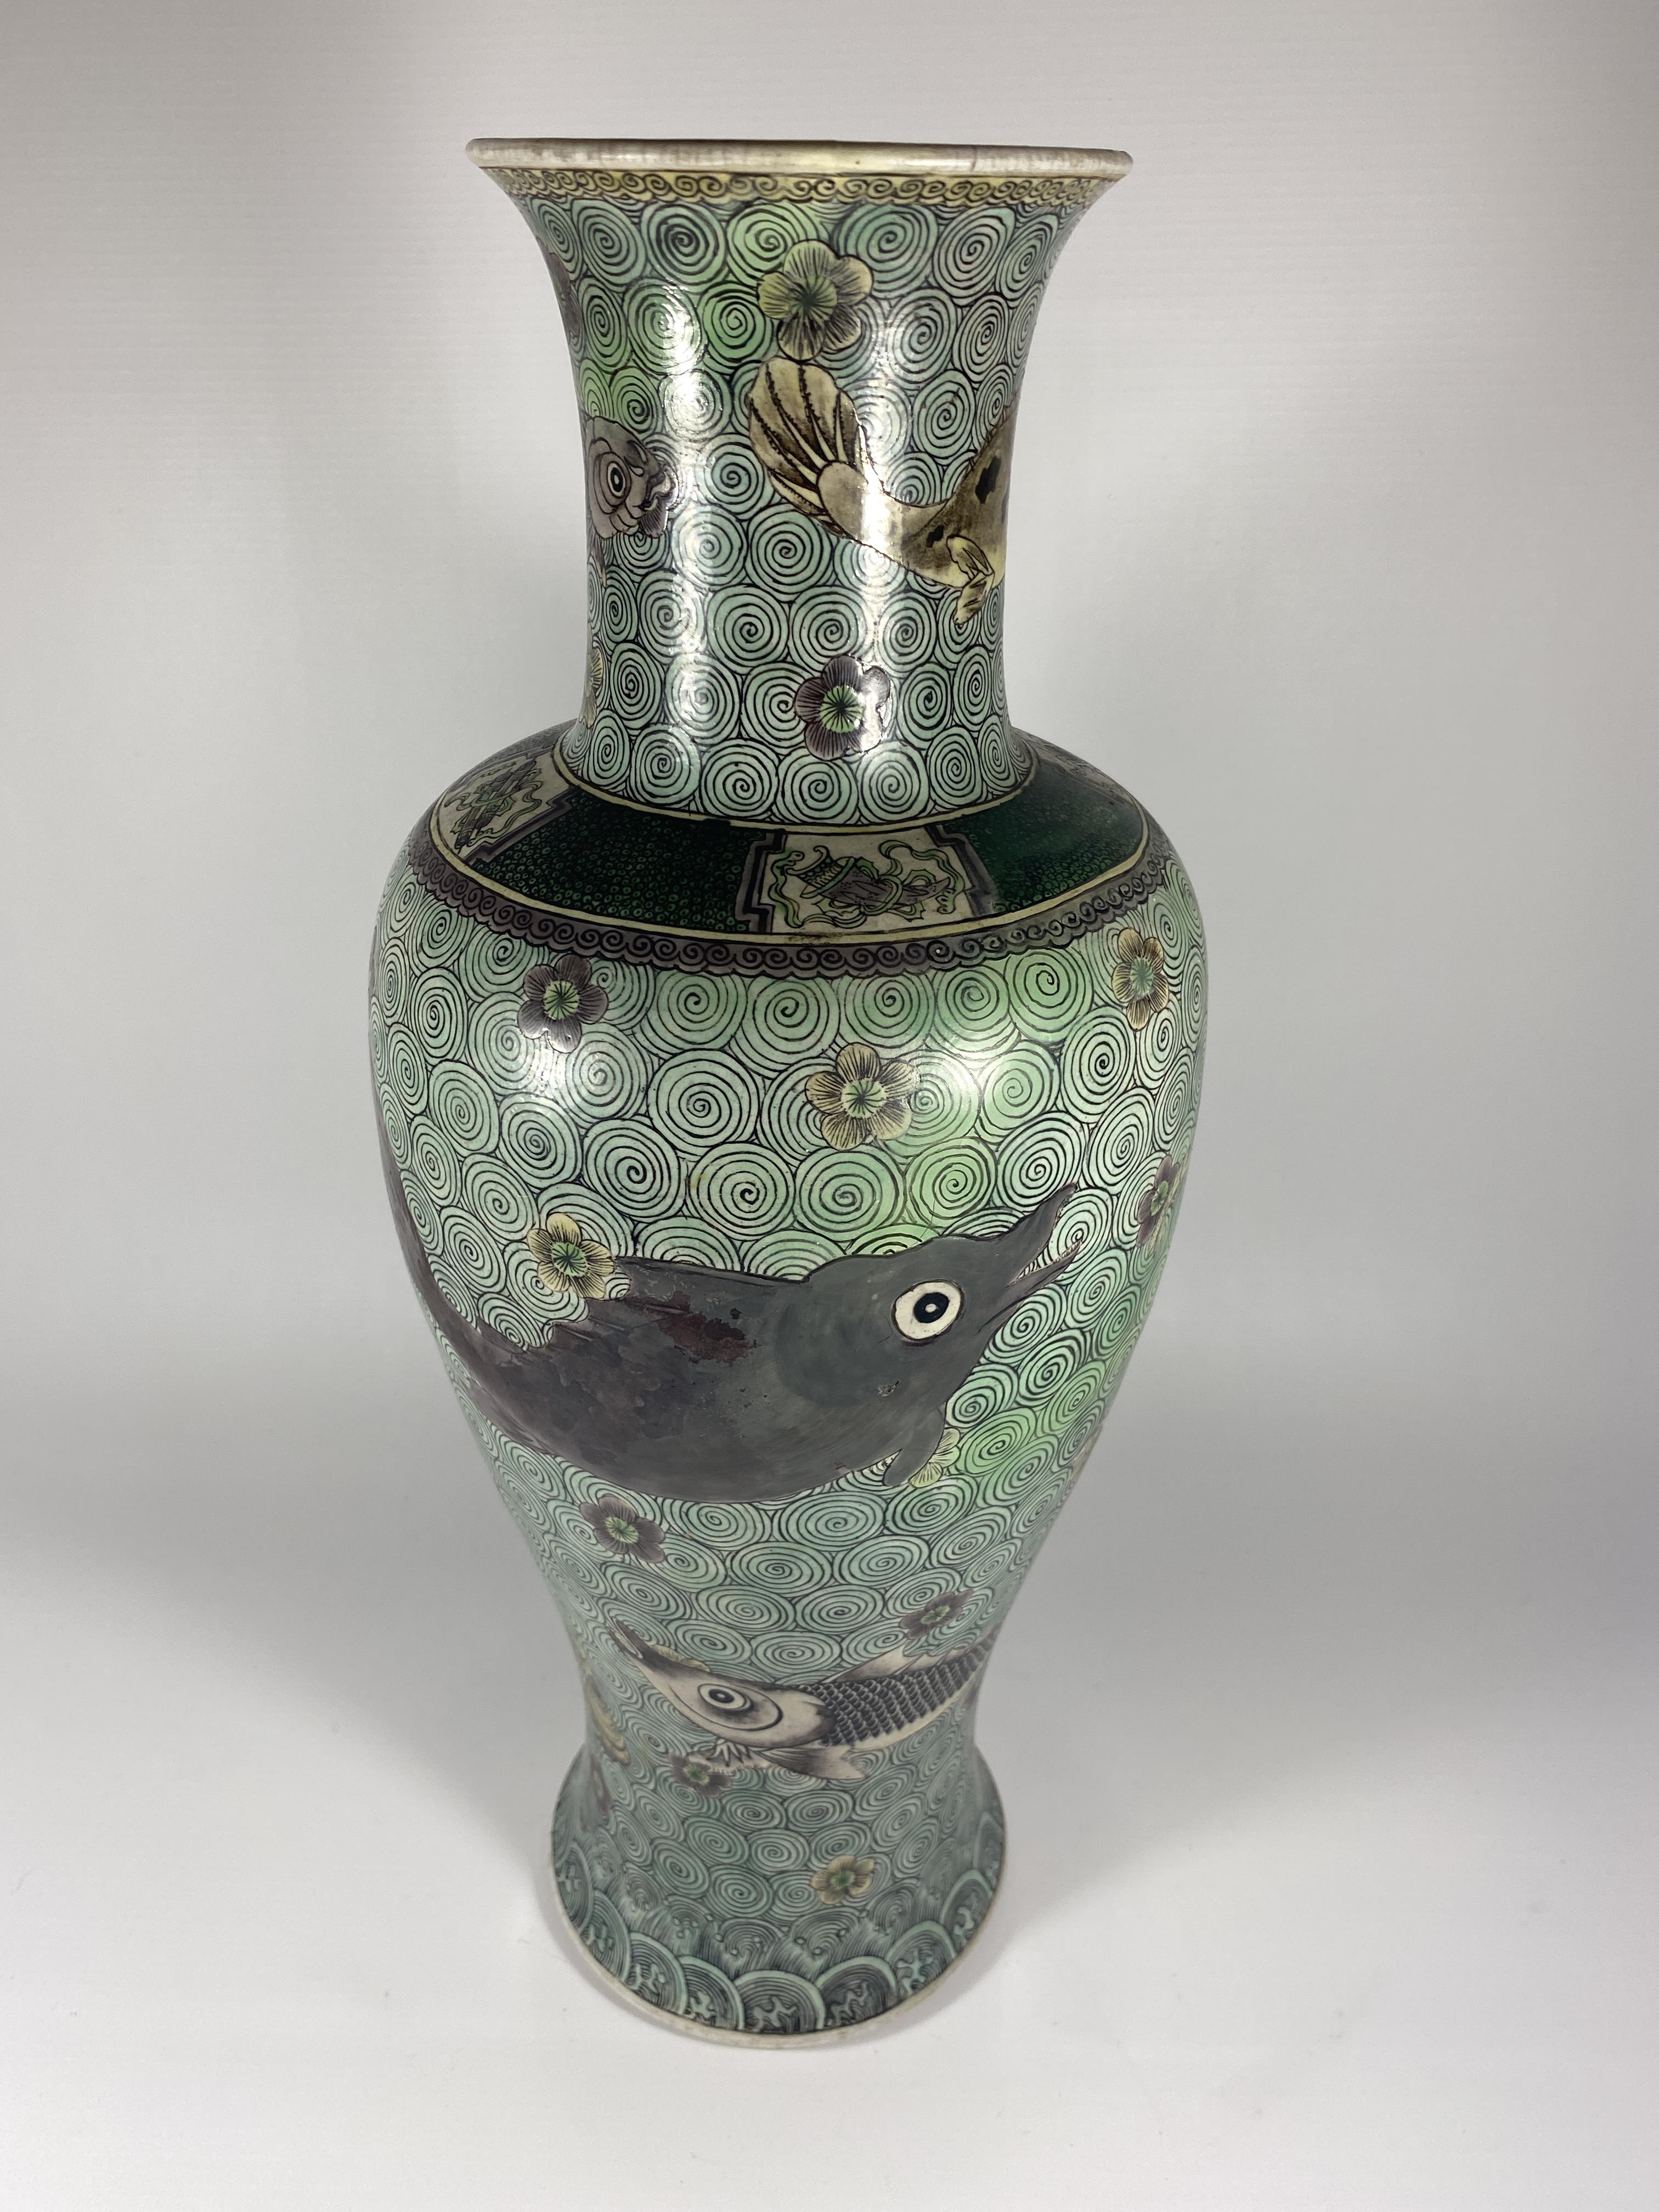 A LARGE MID 19TH CENTURY CHINESE BALUSTER FORM VASE WITH ENAMEL FISH ON A GEOMETRIC CIRCLES - Image 5 of 9